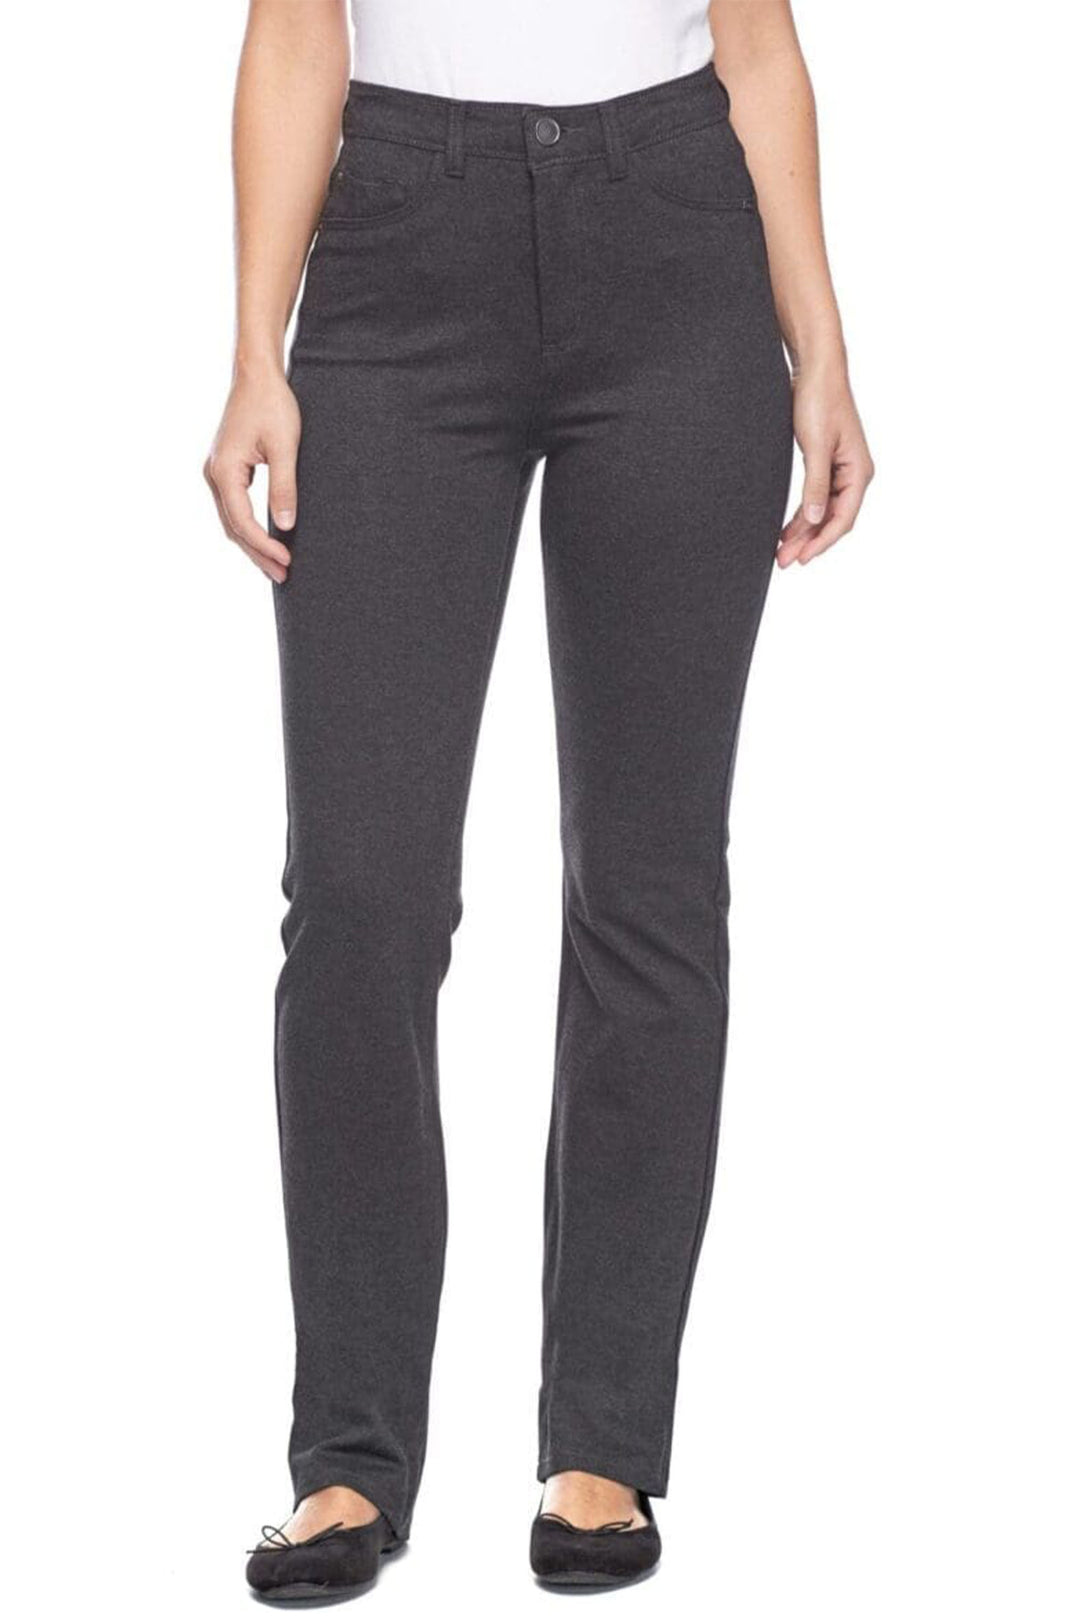 With a wonderwaist for a slimmer fit, medium stretch for a firm feel and a high-rise five-pocket design.